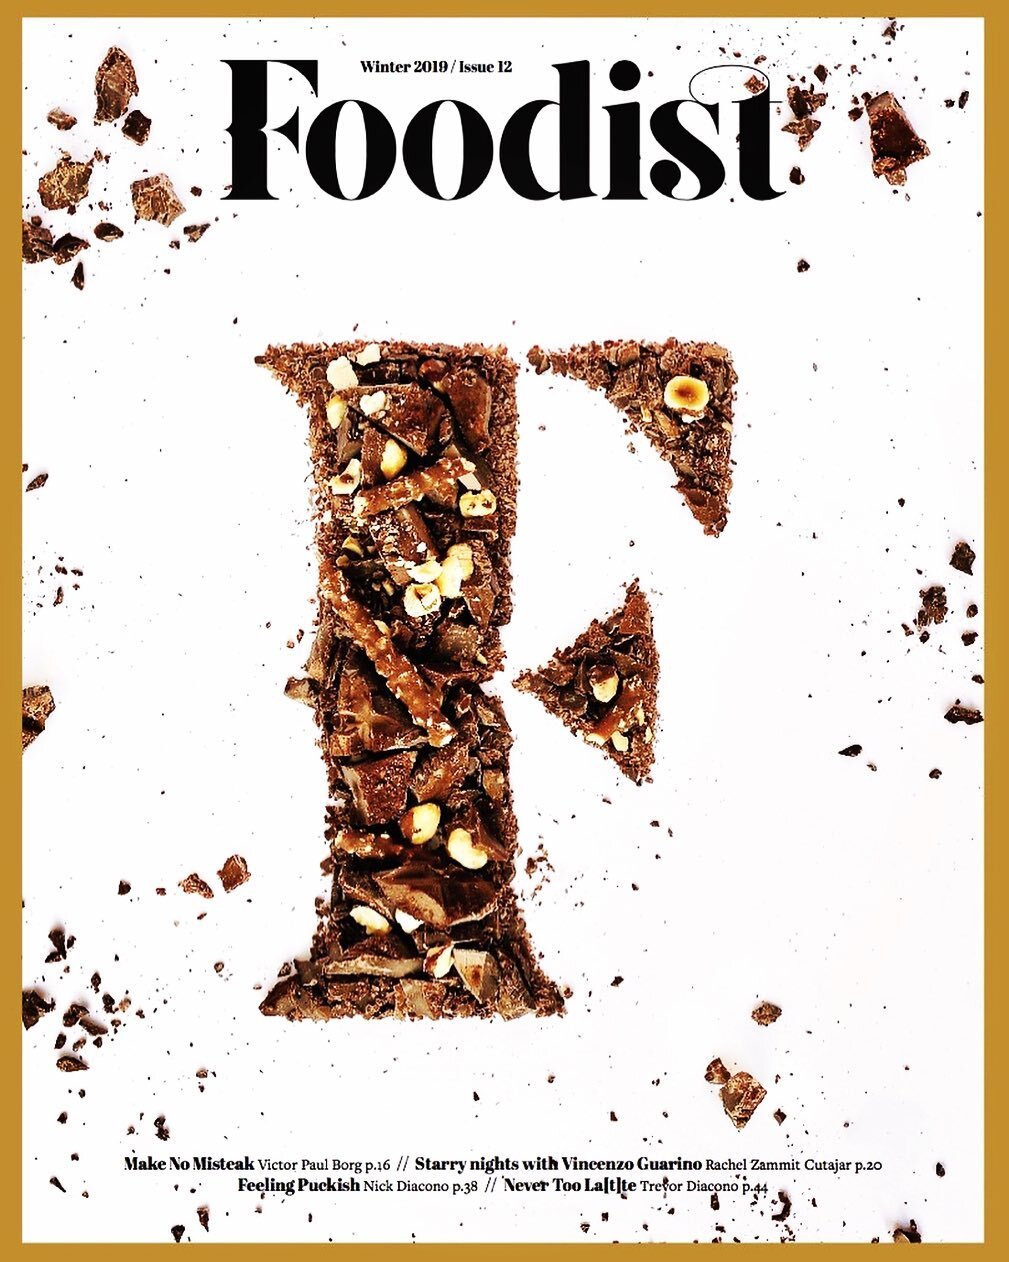 .
Winter edition is up and loaded. Be the first to read the online version now!
.
Packed with wintery recipes. .
.
http://bit.ly/Foodist12
.
.
Cover credits
📸 Chris Sant Fournier
𝐅 Styled by Foodist